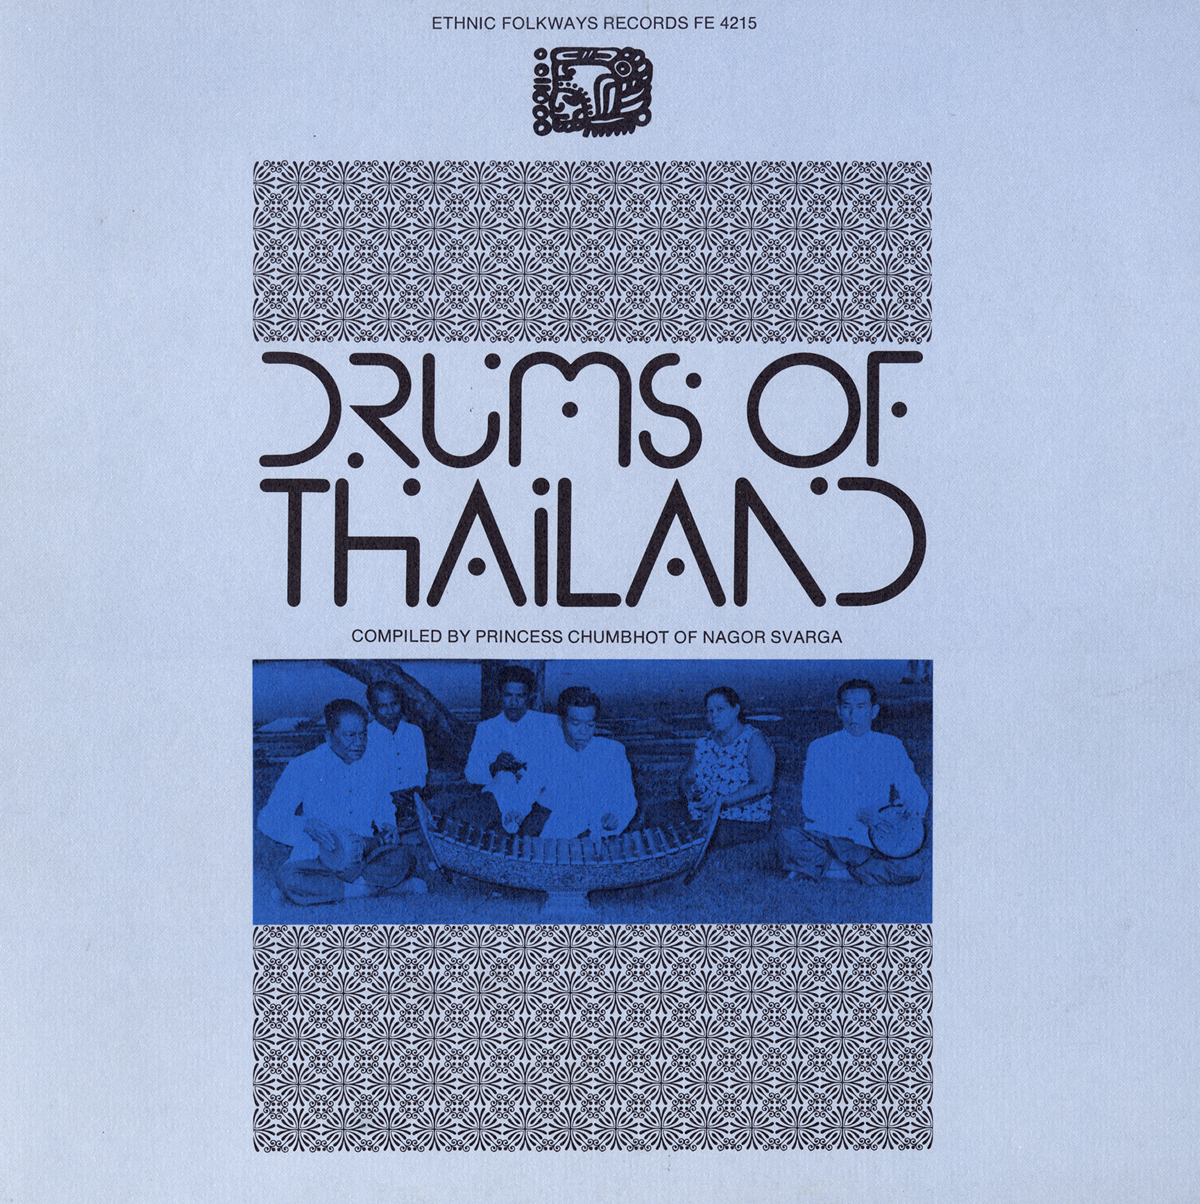 DRUMS OF THAILAND / VARIOUS